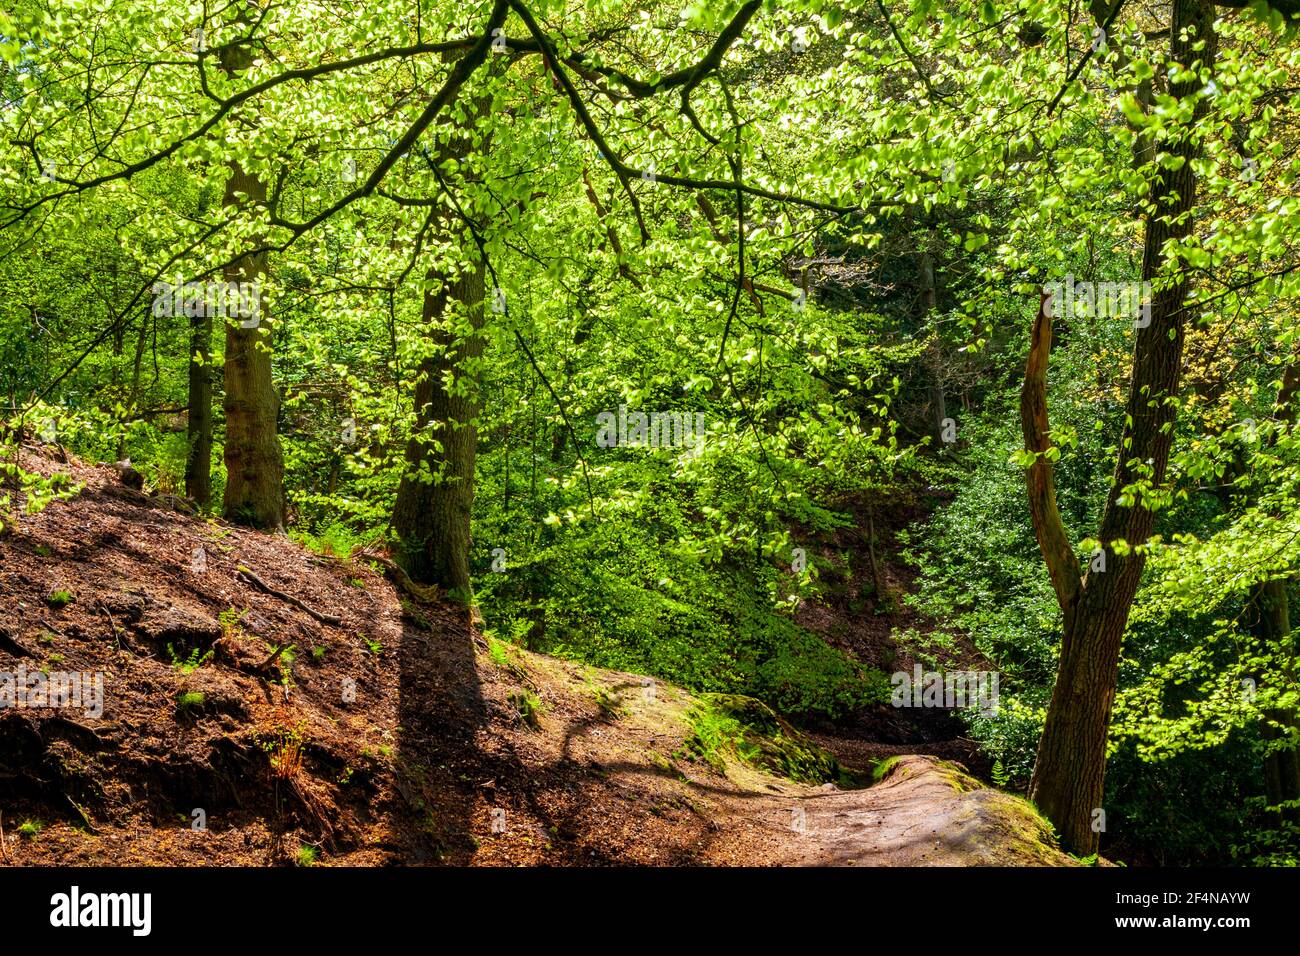 Woodland trees in early summer at Alderley Edge a thickly wooded sandstone escarpment near Macclesfield in Cheshire north west England UK. Stock Photo